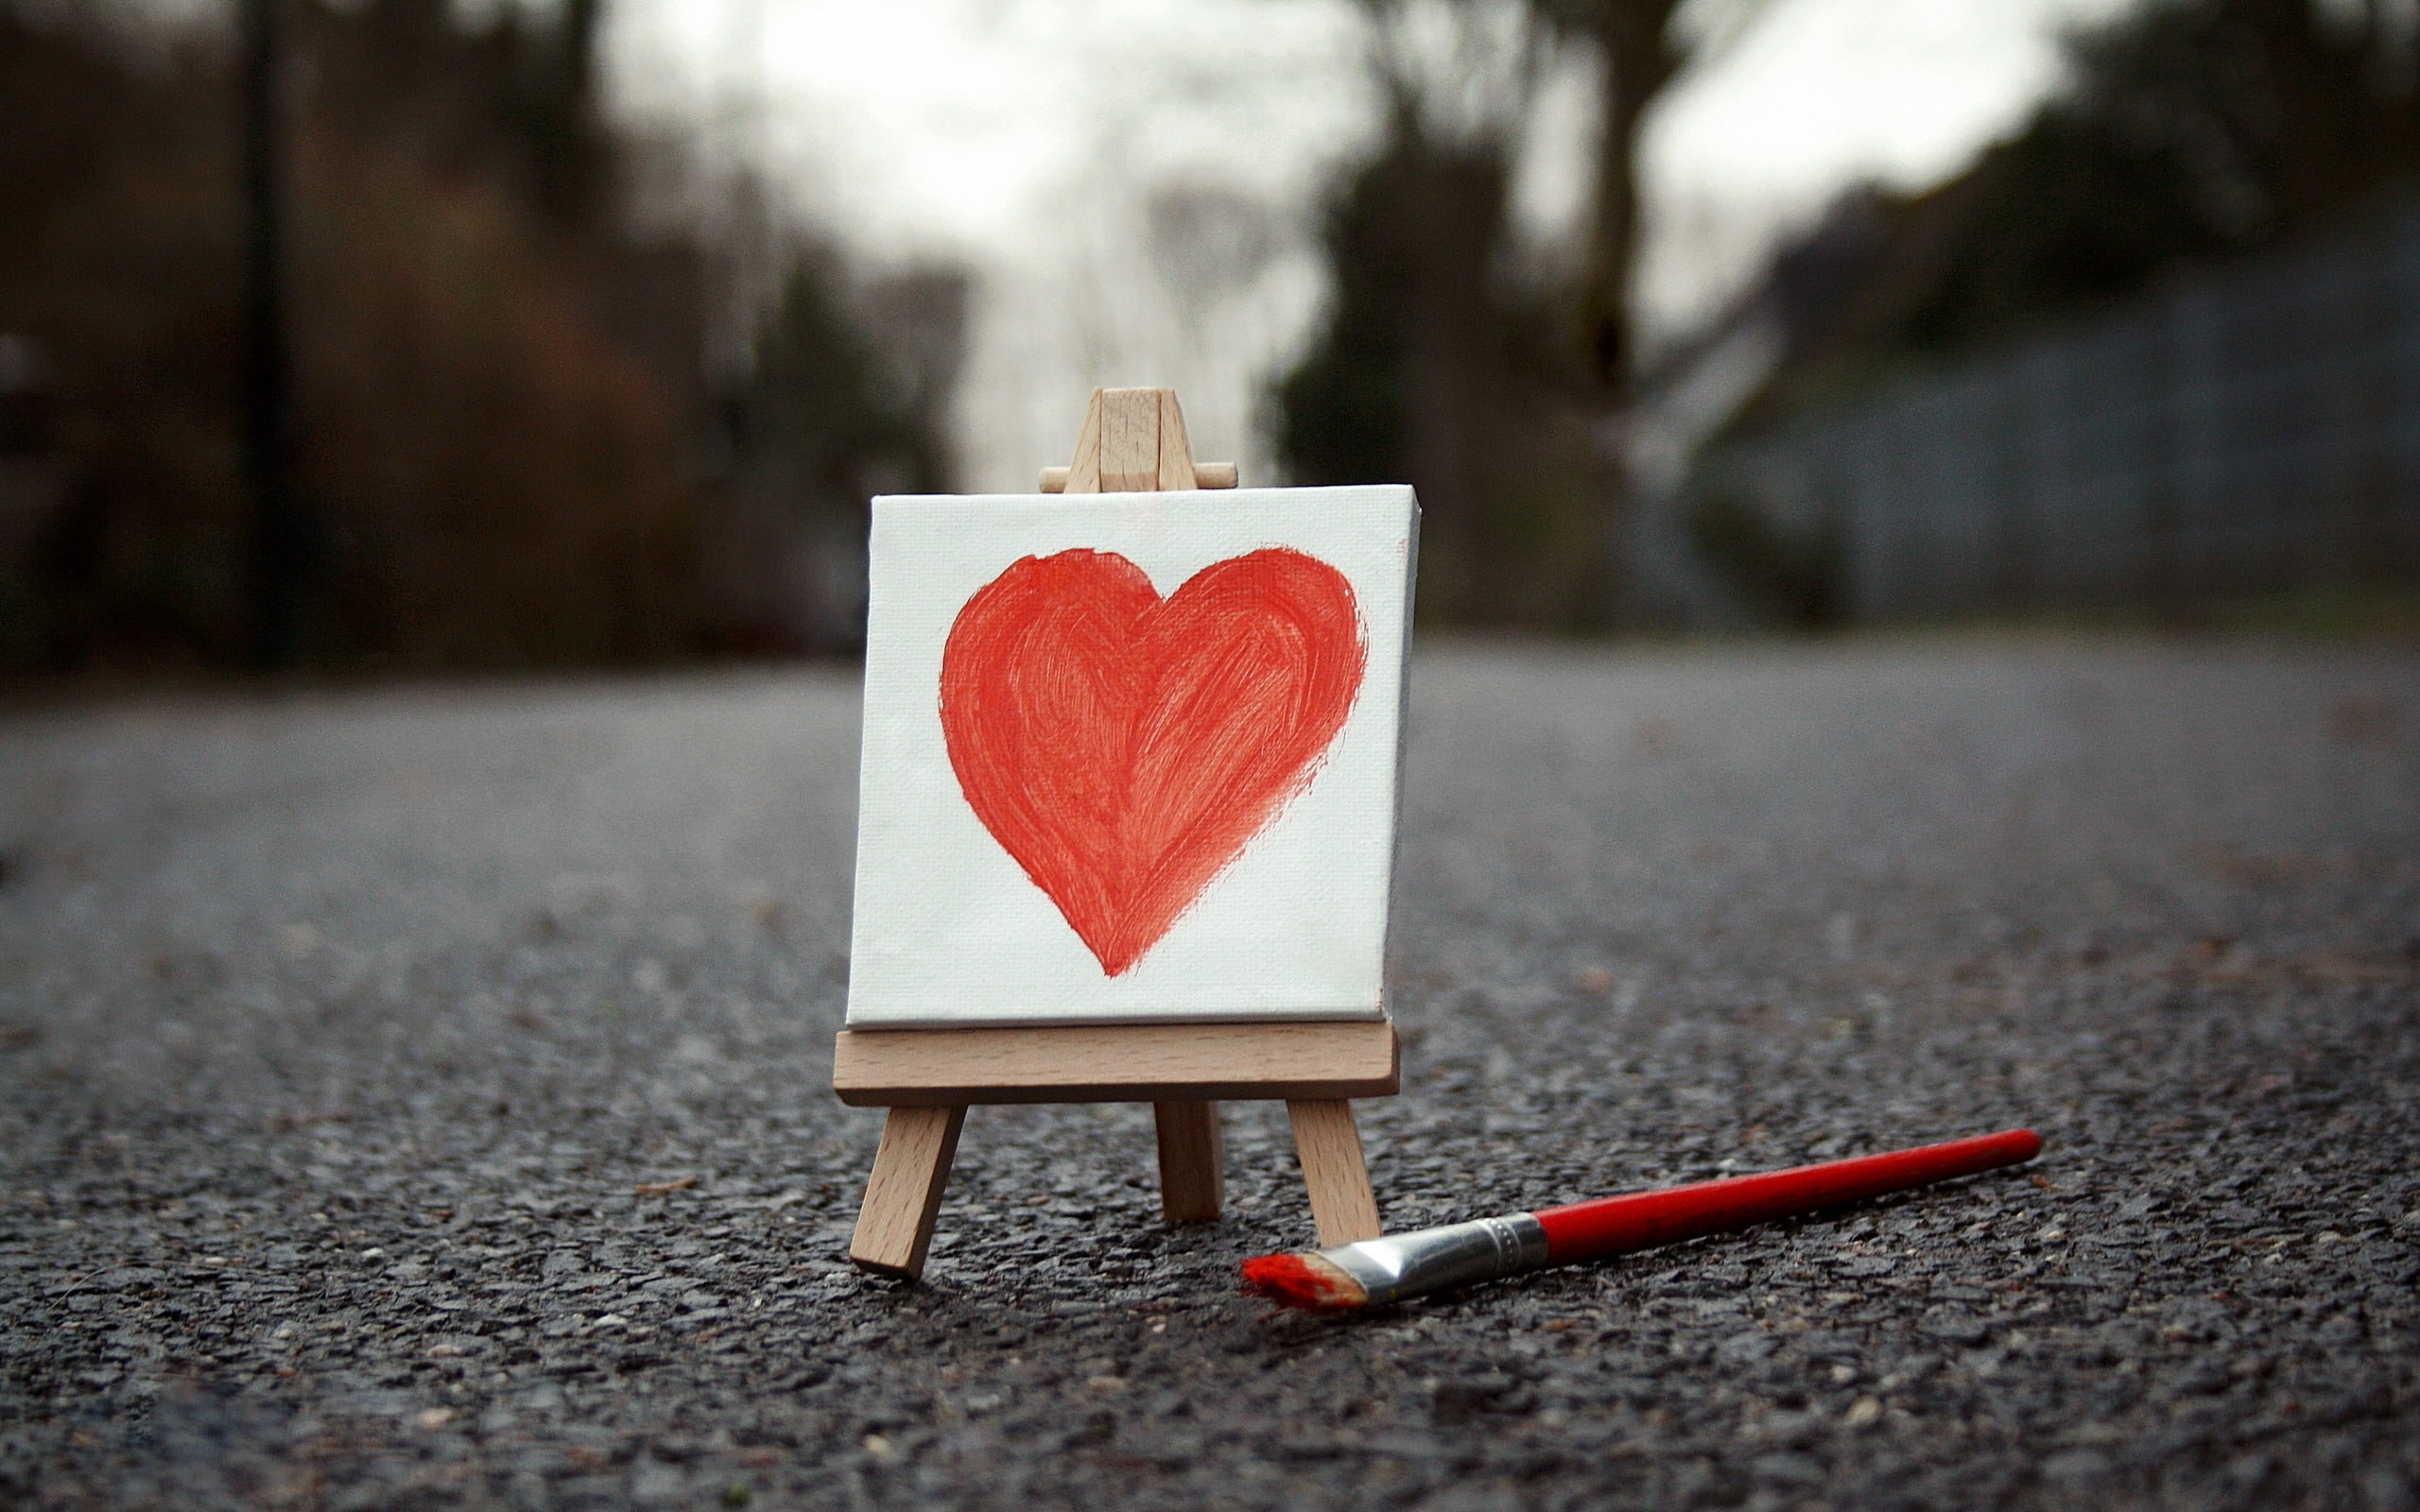 Painted Heart, paintbrush and easel miniature, picture, love